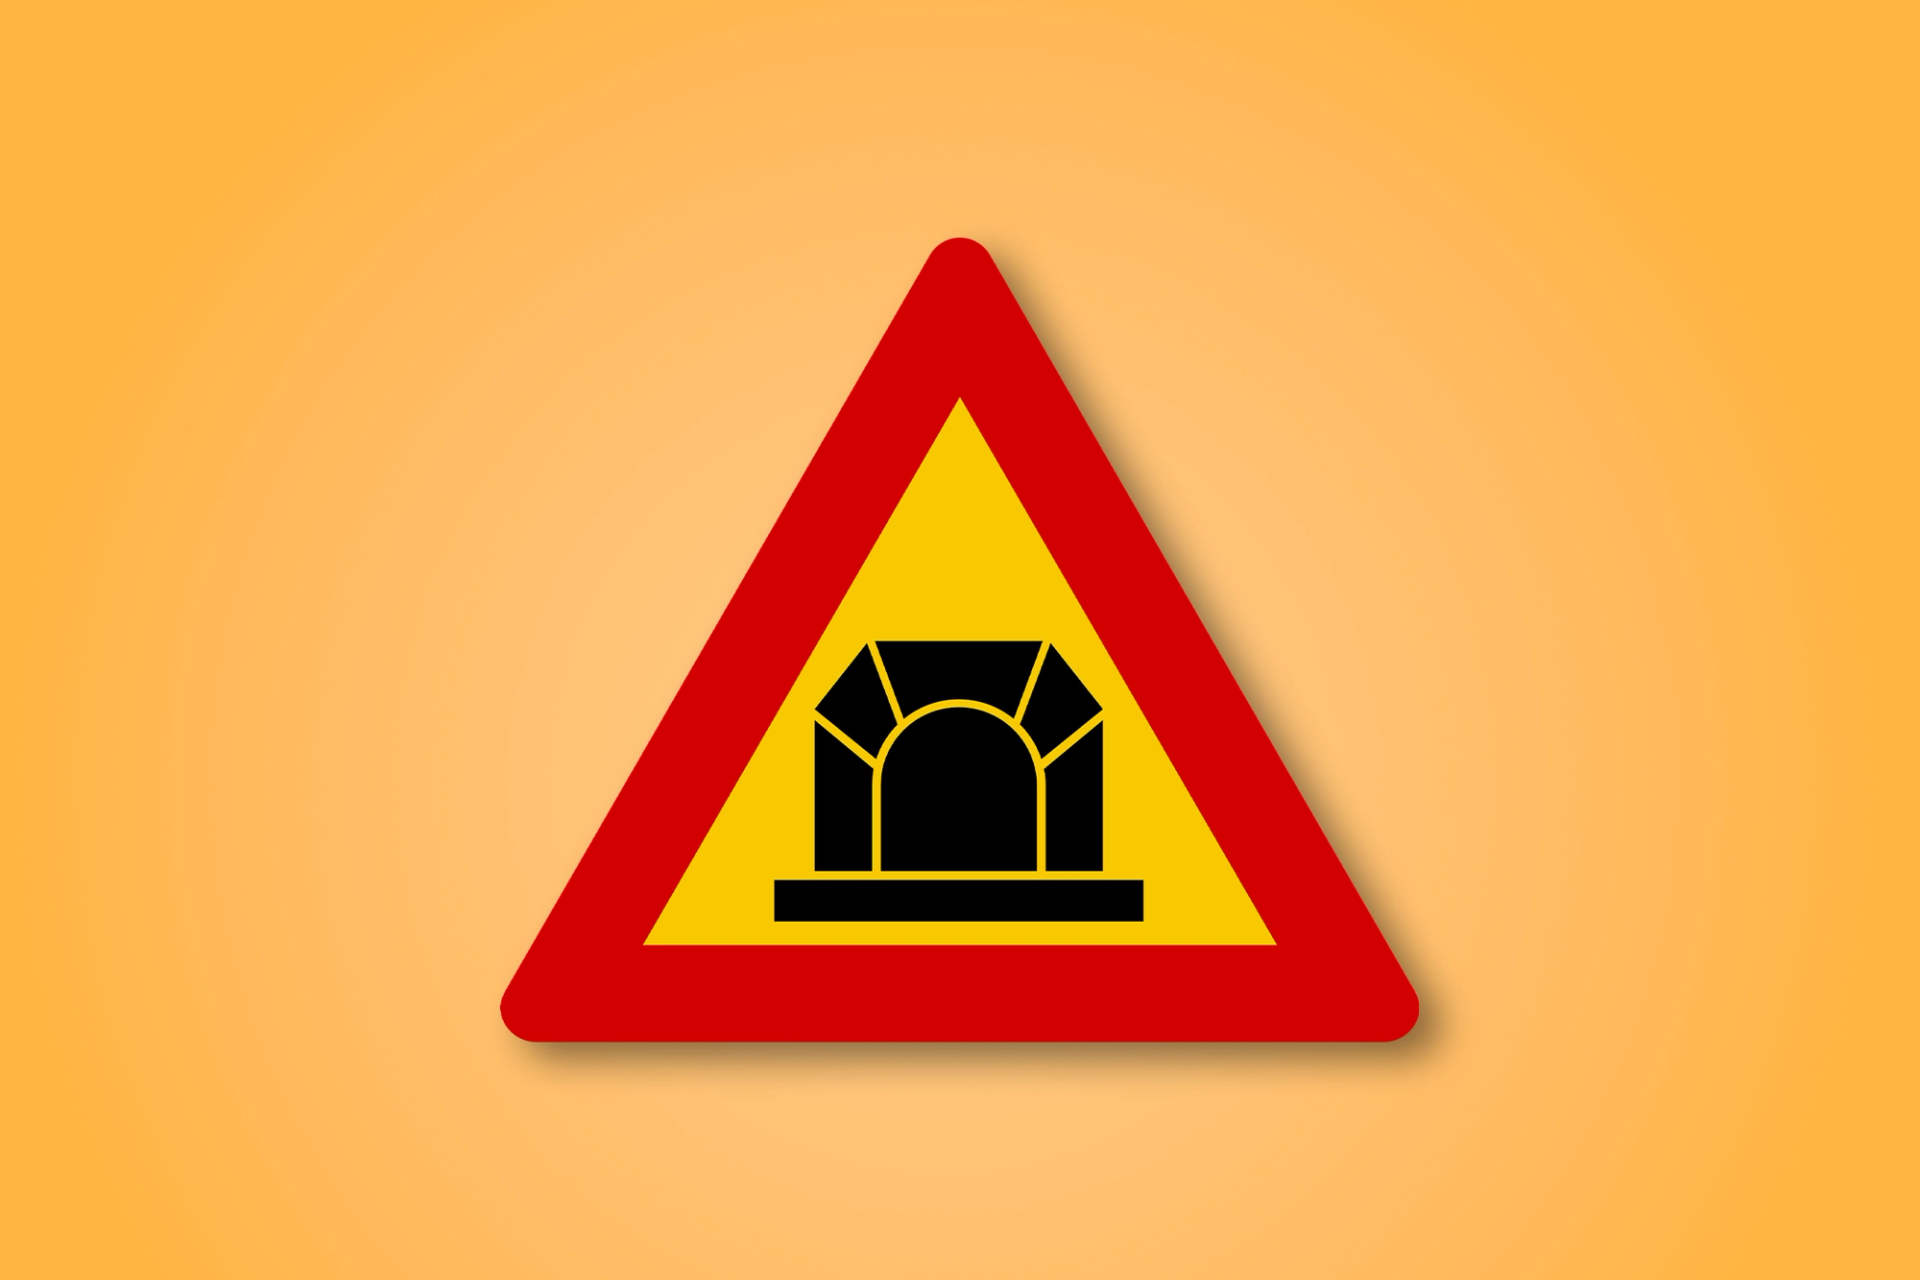 Red and yellow triangle road sign with a tunnel in the middle. This road sign means Tunnel Ahead